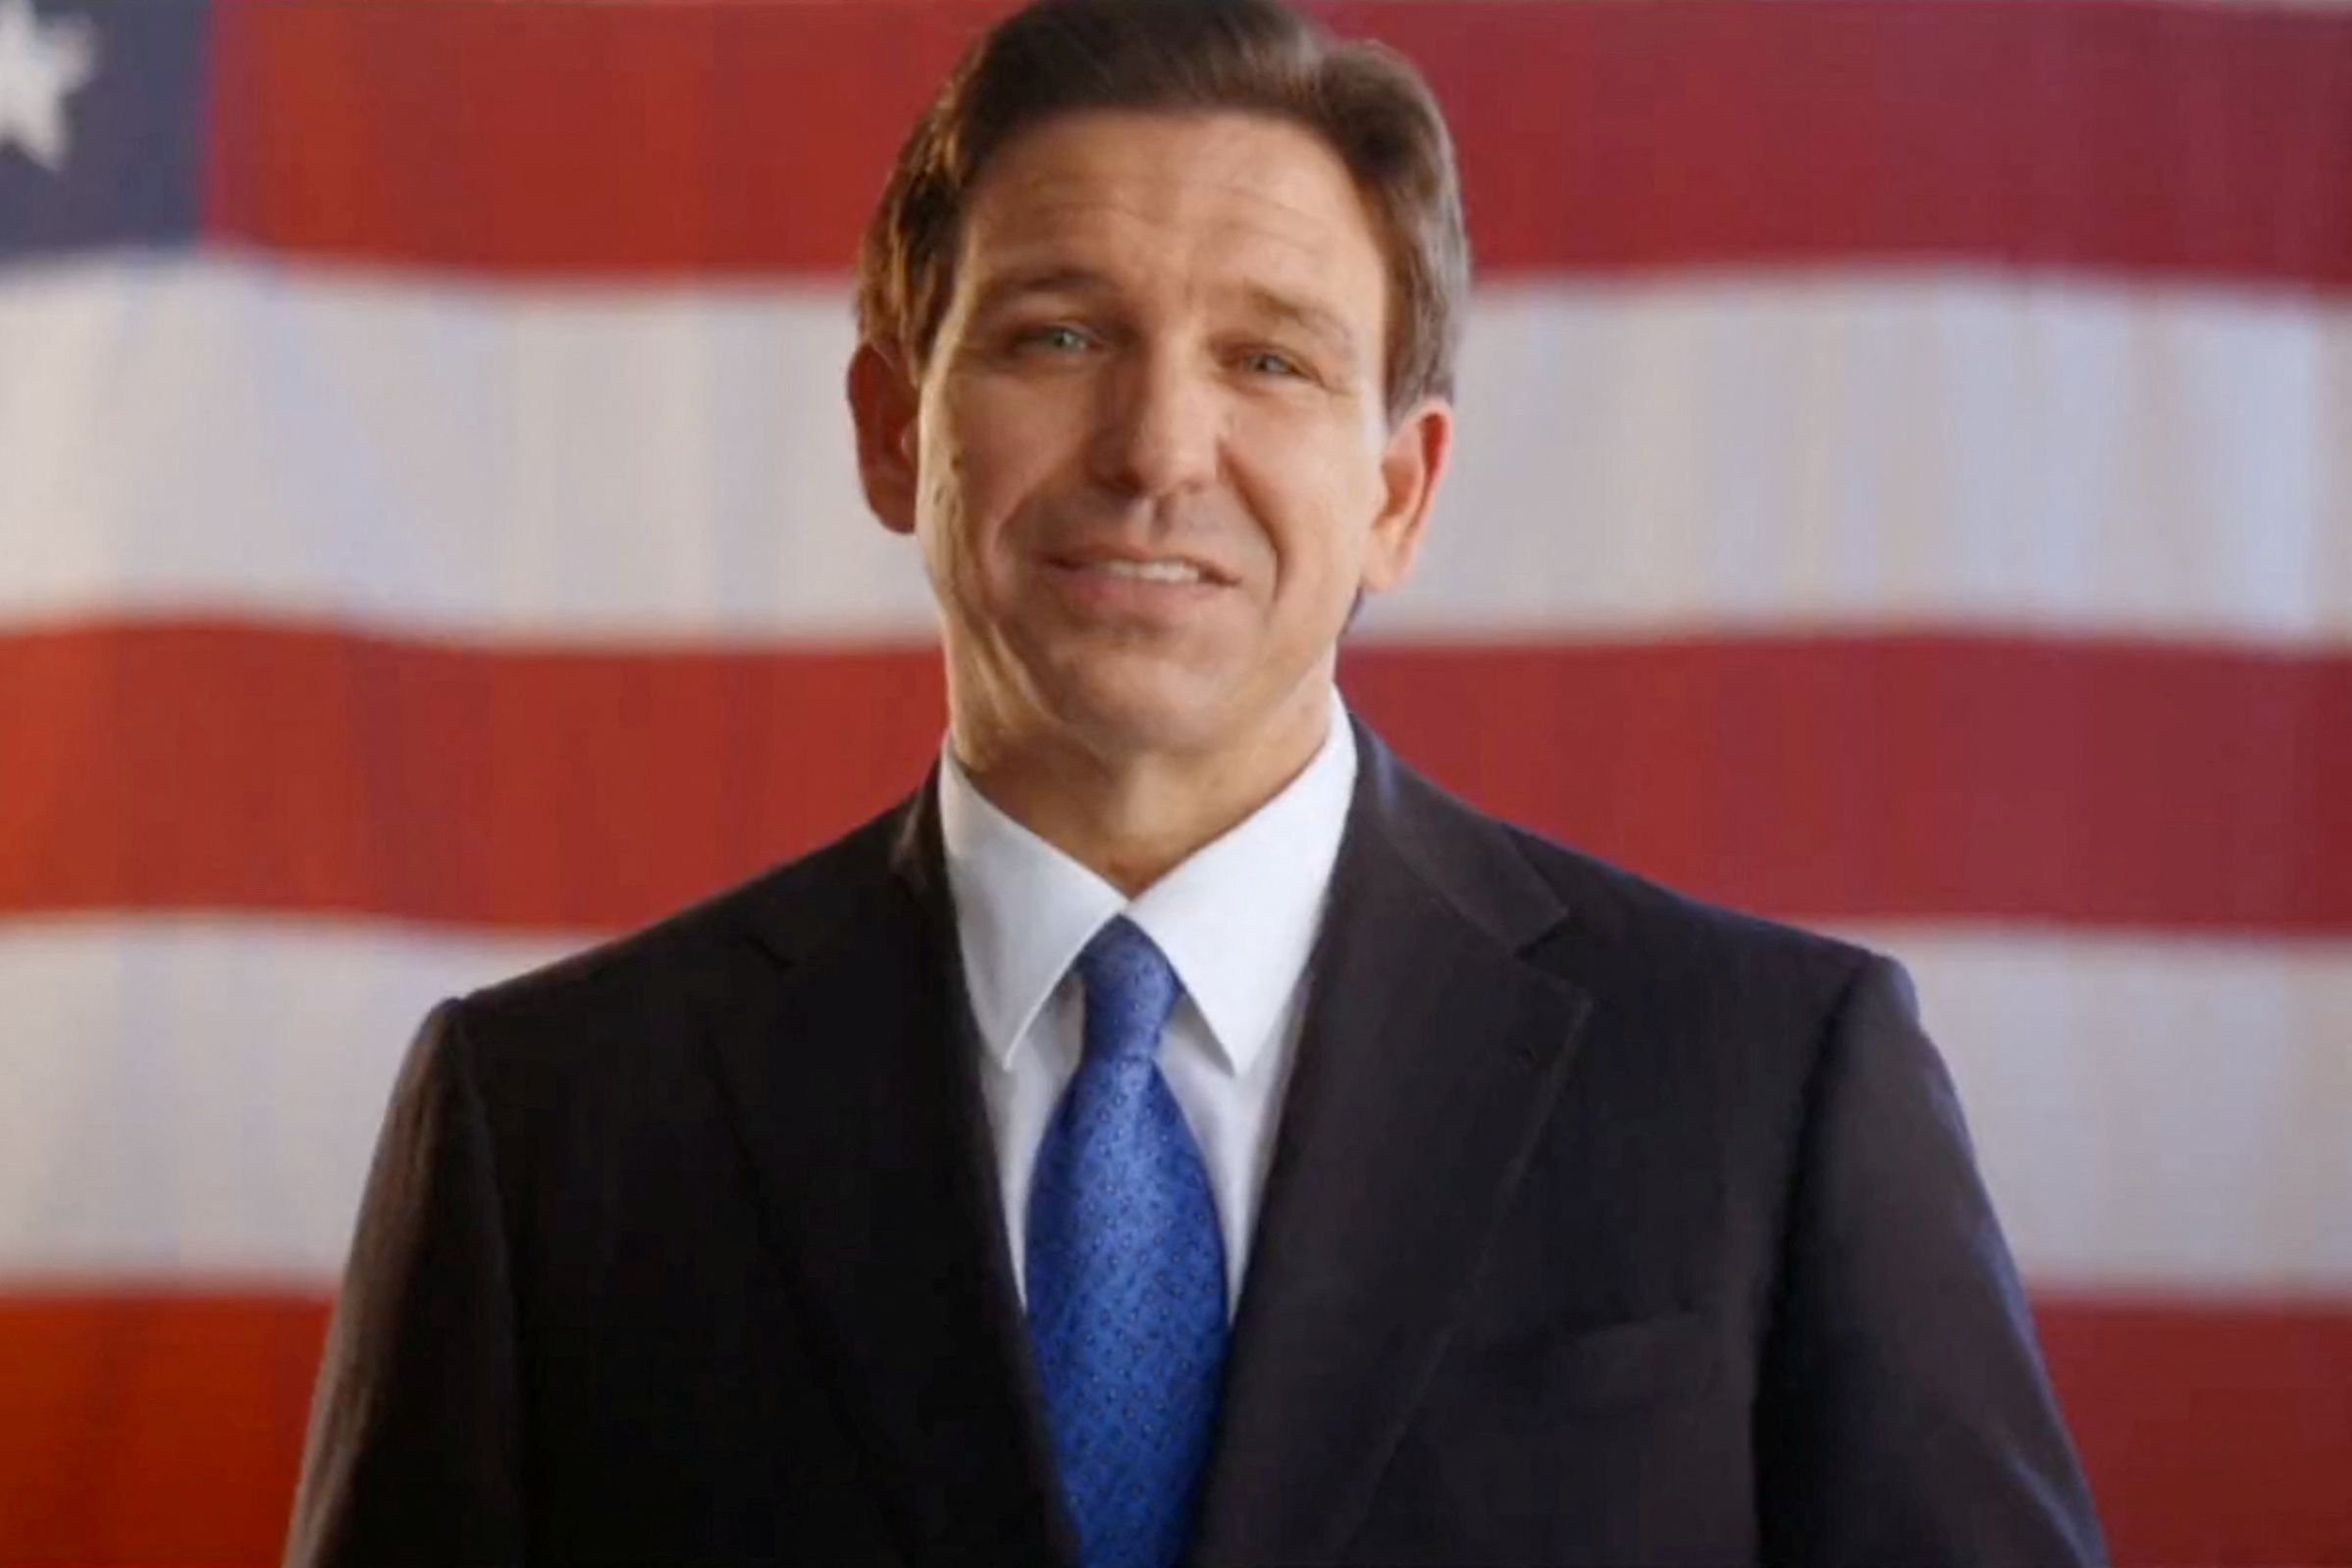 Florida Governor Ron DeSantis speaks as he announces he is running for the 2024 Republican presidential nomination